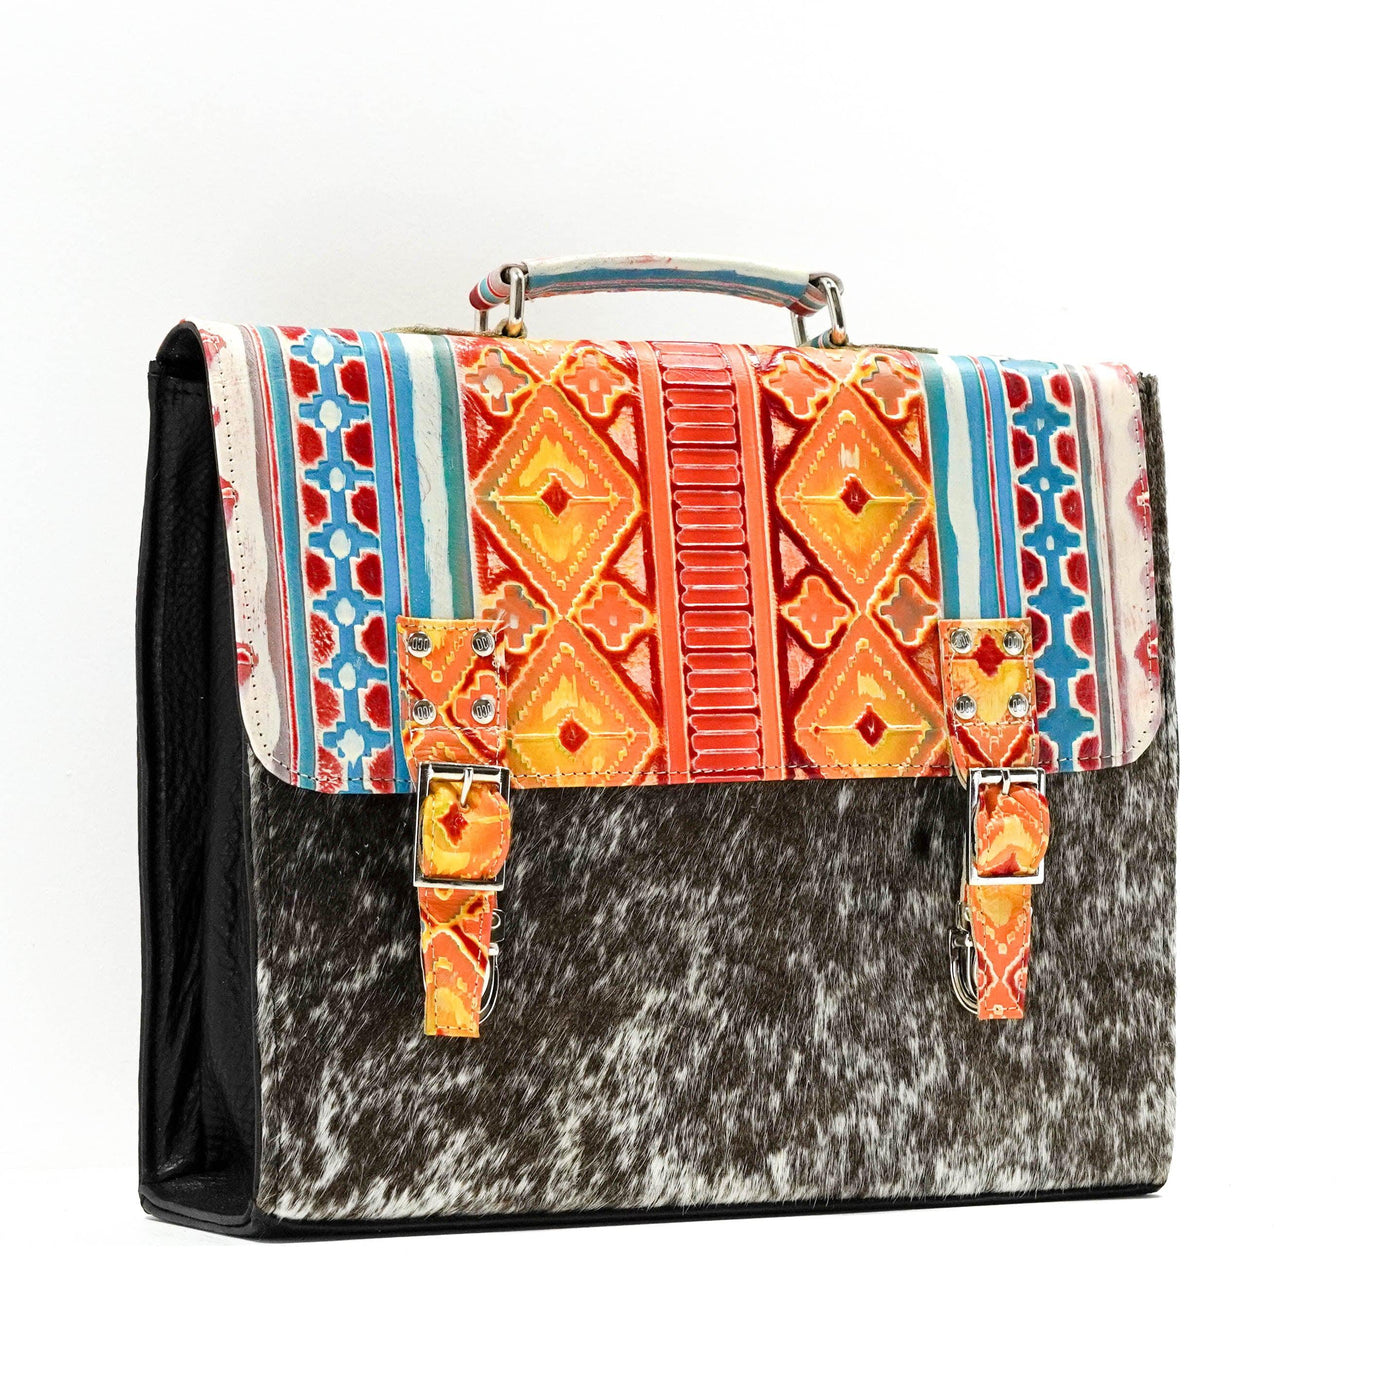 Briefcase - Longhorn w/ Great Plains Navajo-Briefcase-Western-Cowhide-Bags-Handmade-Products-Gifts-Dancing Cactus Designs